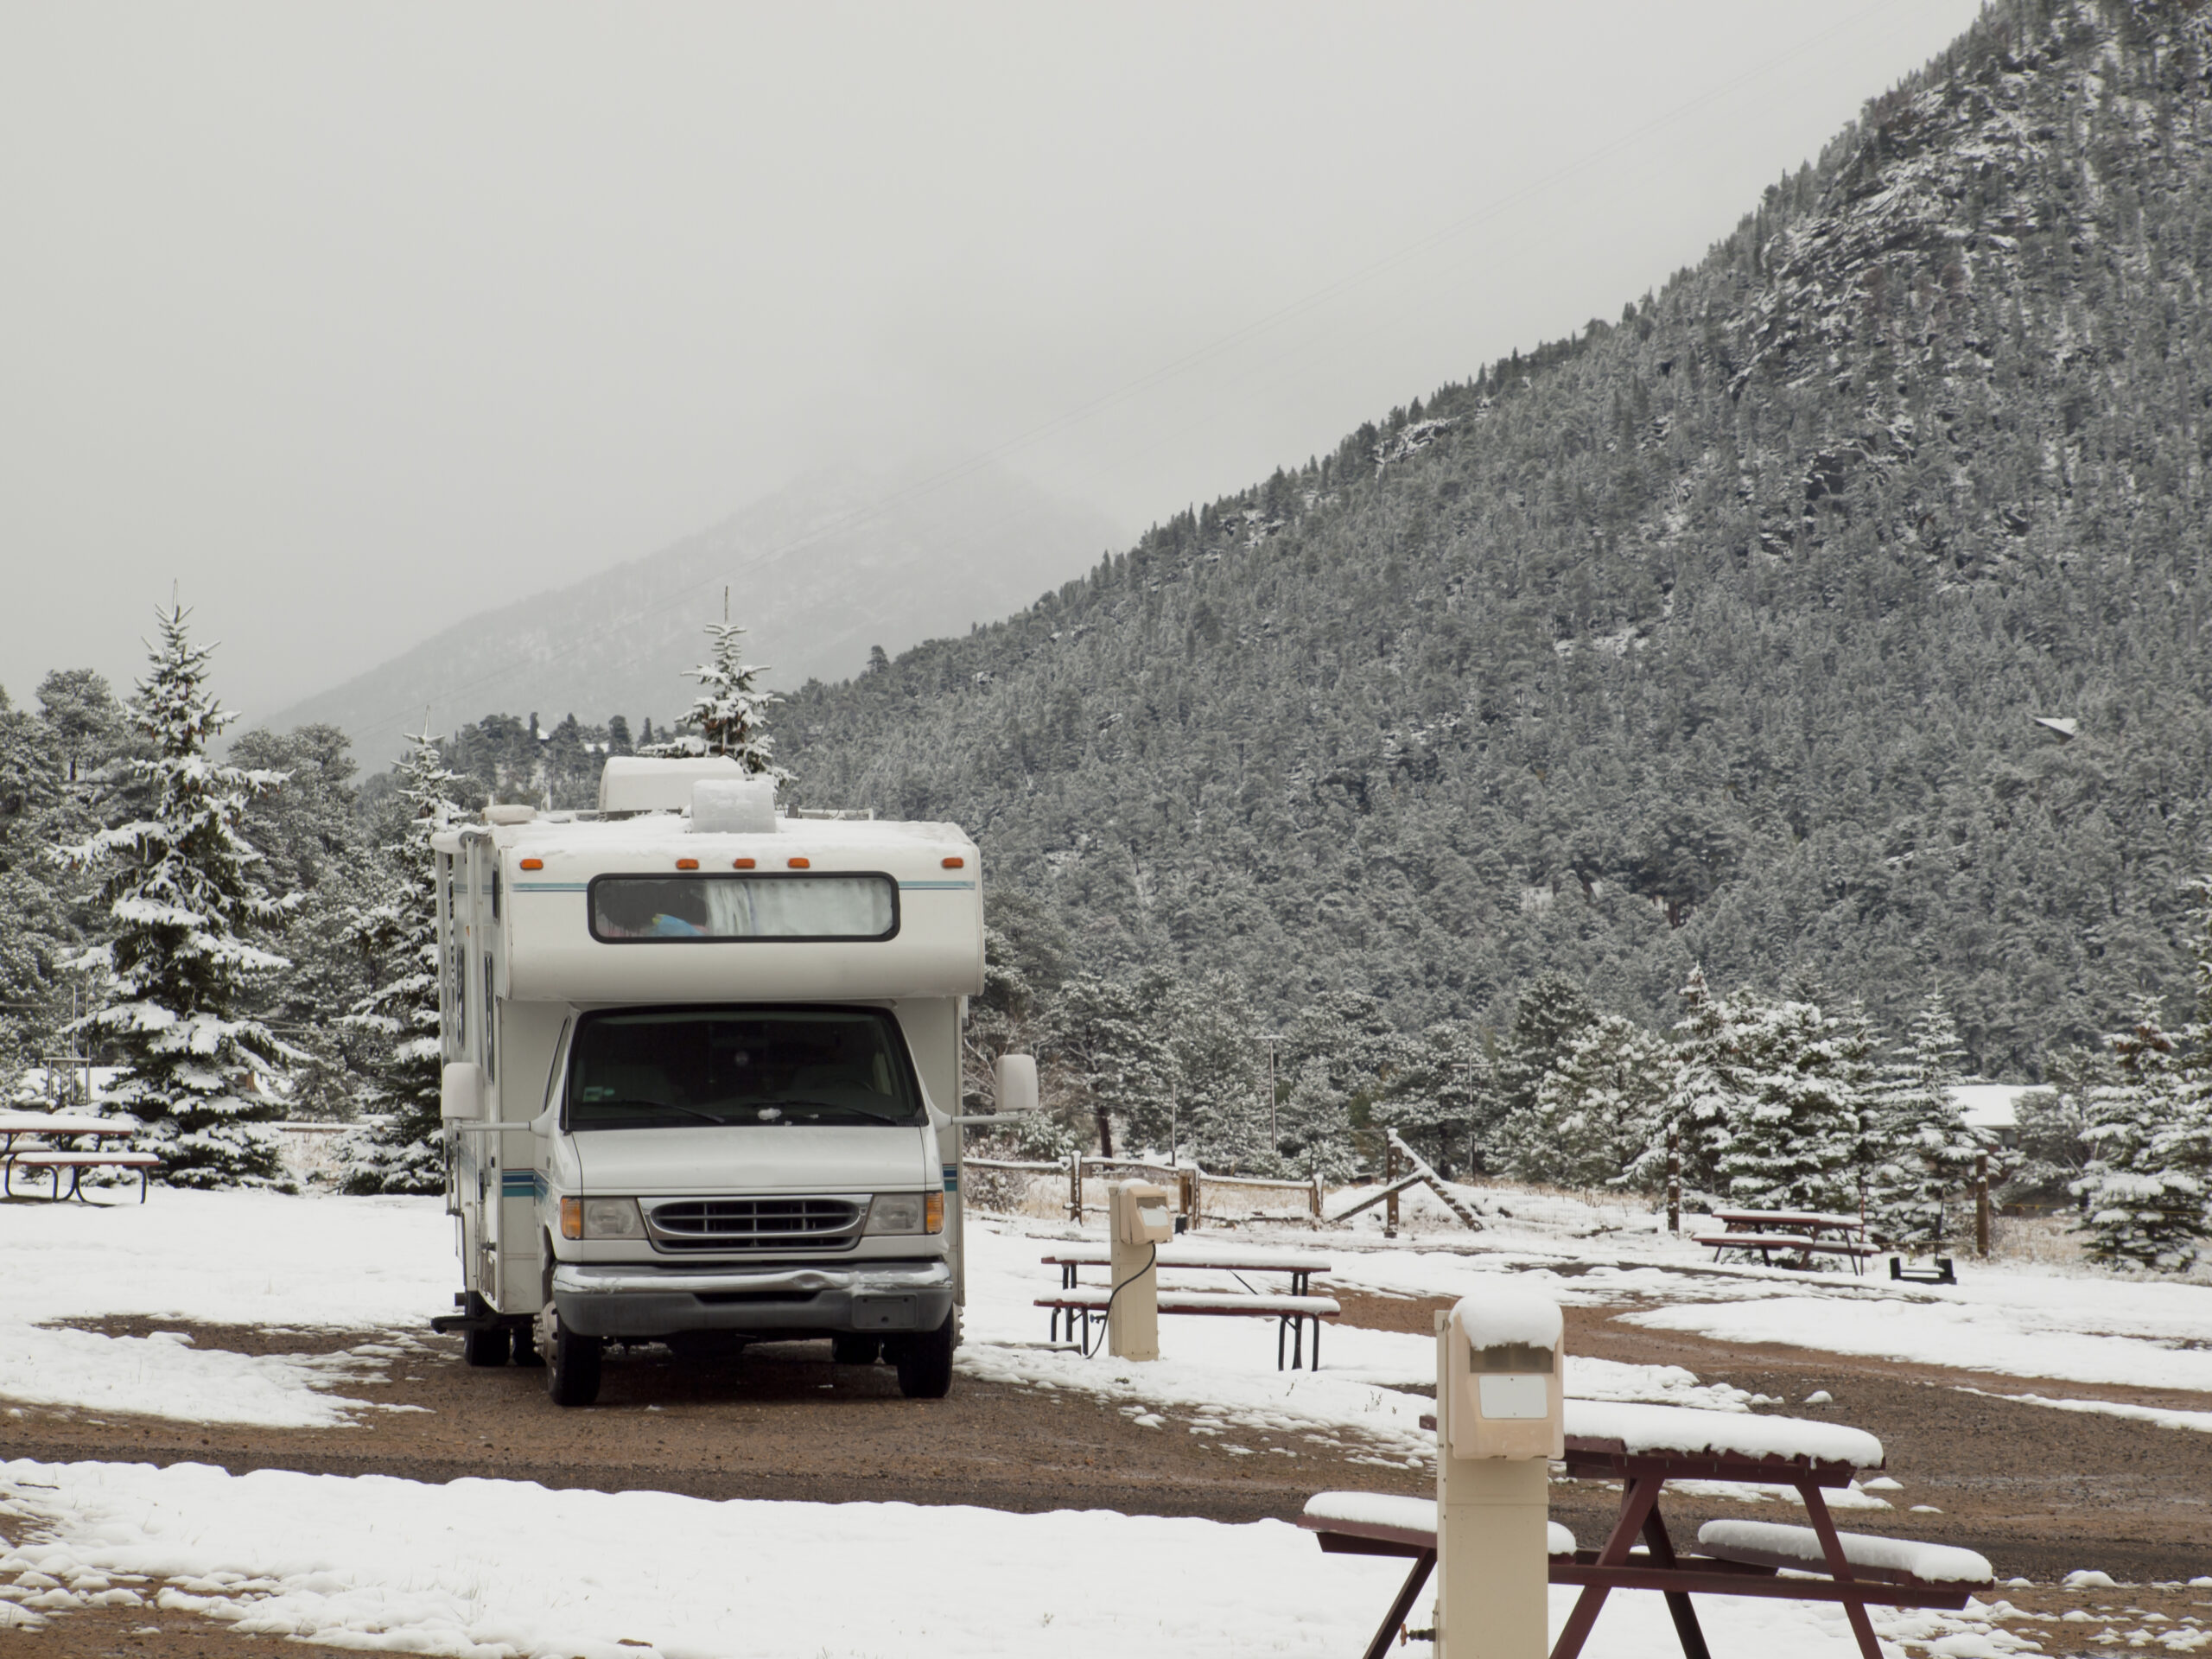 Single RV sits in show covered campsite in mountains - RV warranty